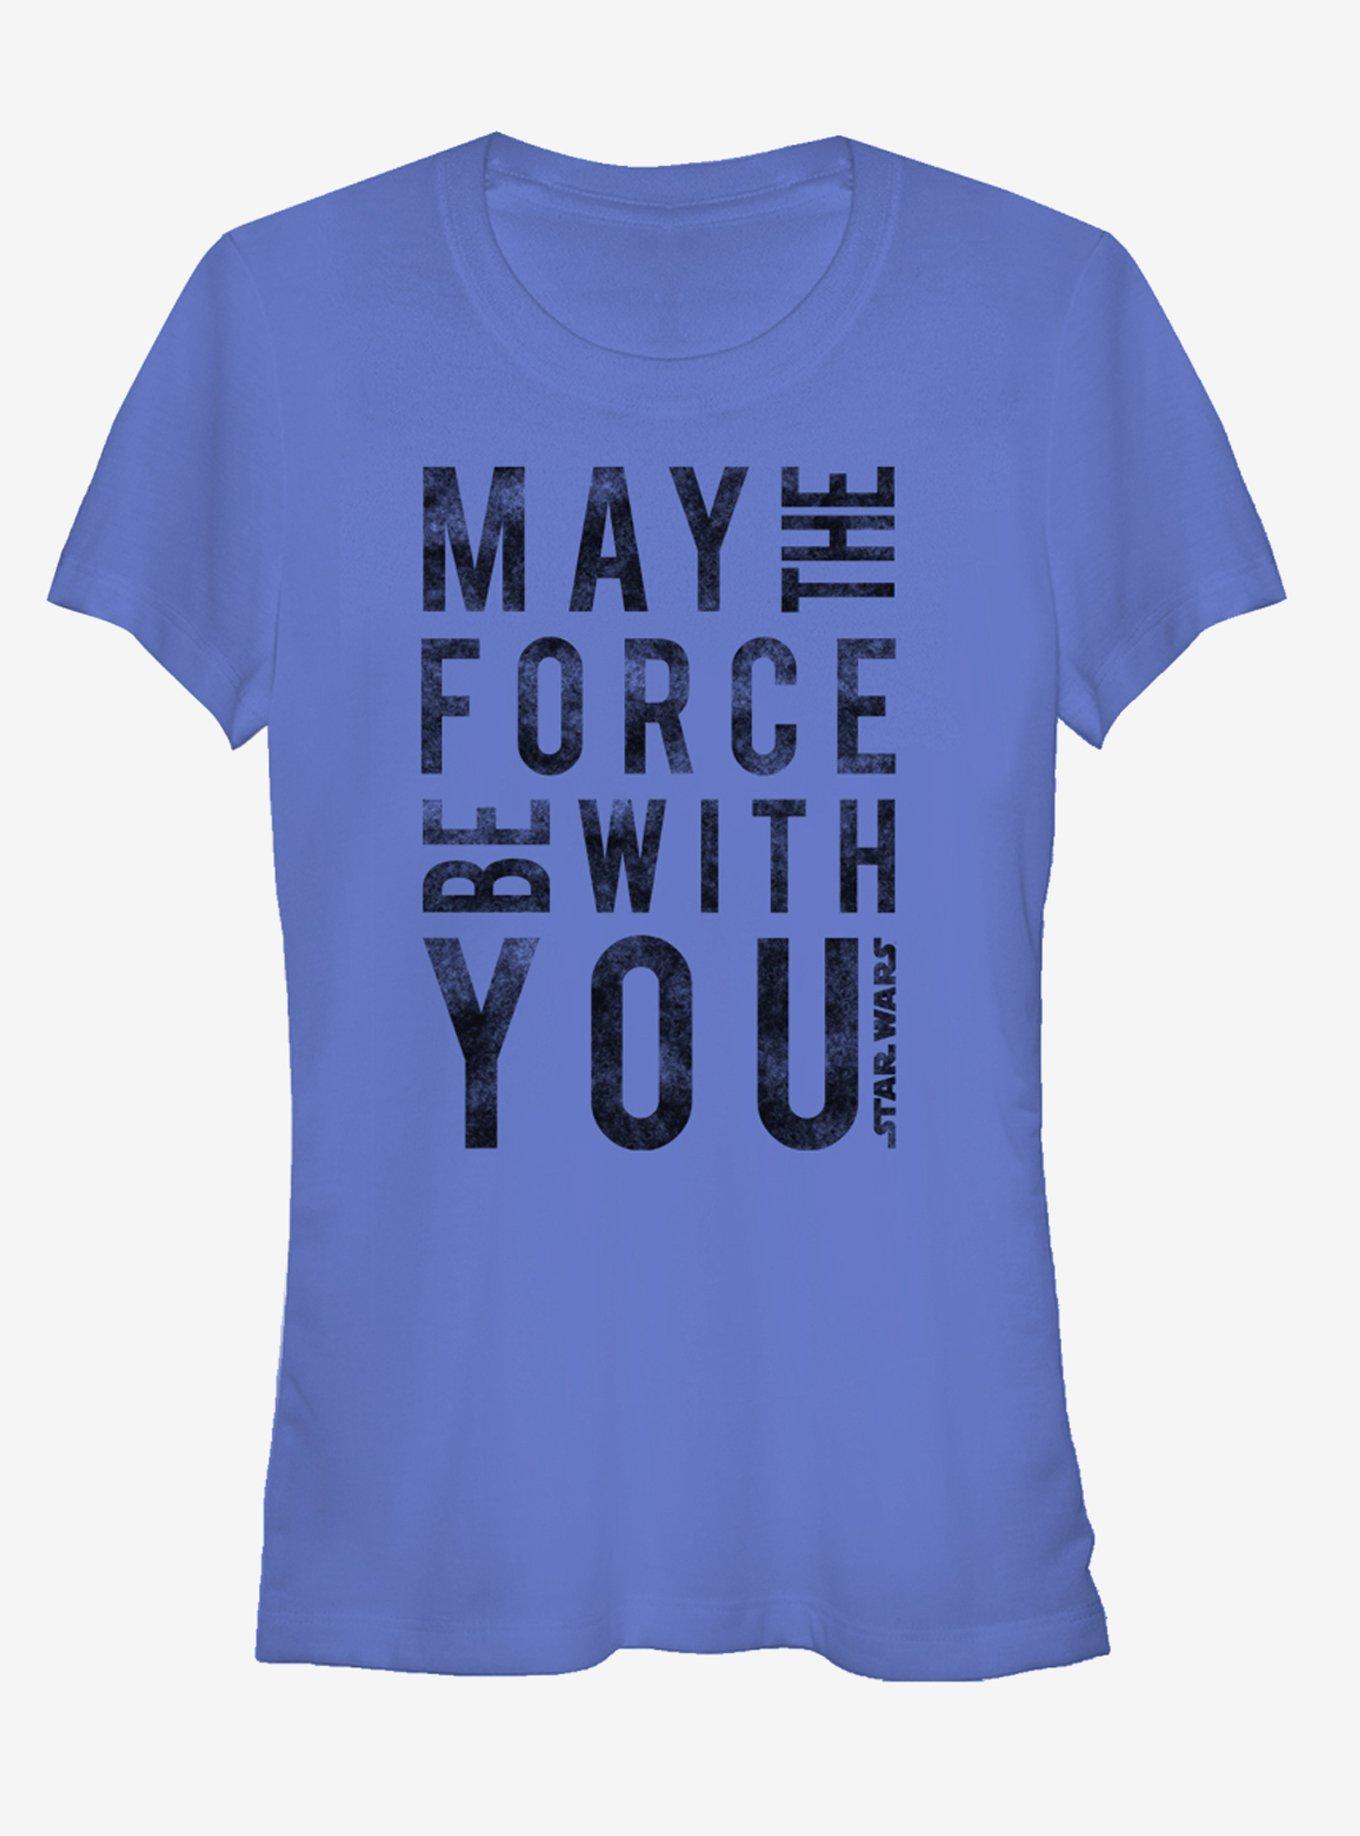 Star Wars Distressed May the Force Be With You Girls T-Shirt, ROYAL, hi-res